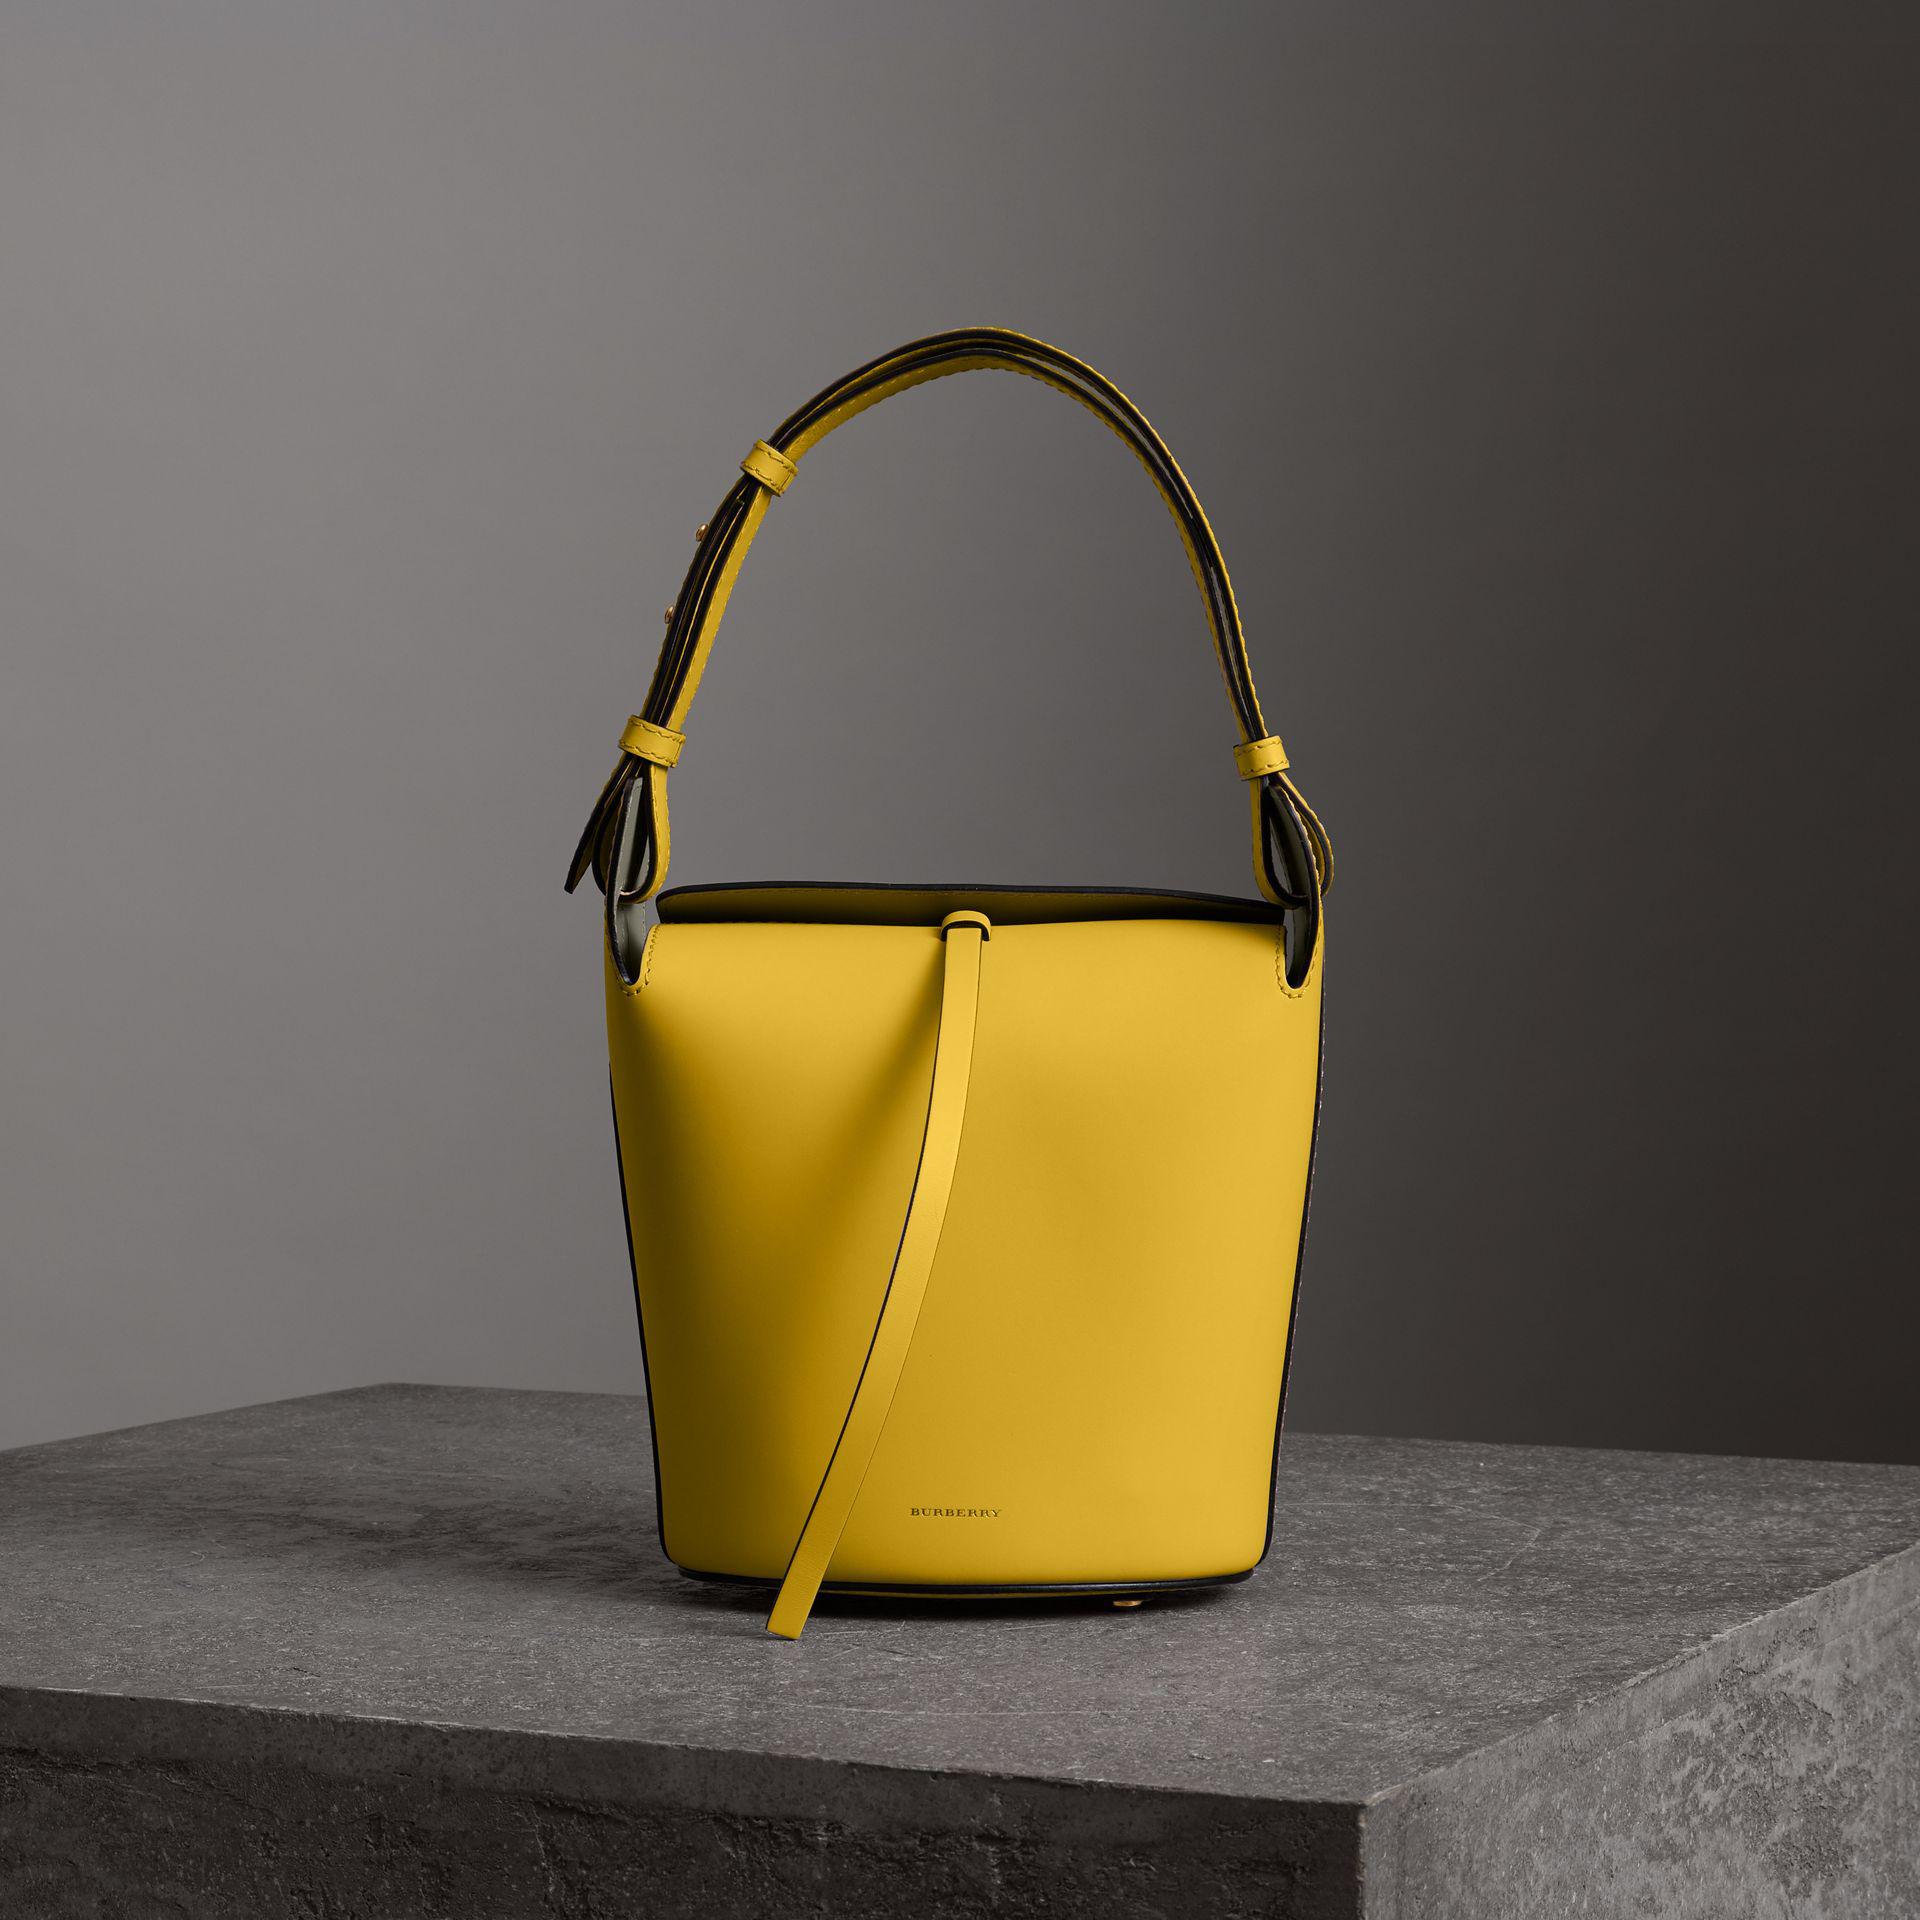 Burberry The Small Leather Bucket Bag in Yellow - Lyst